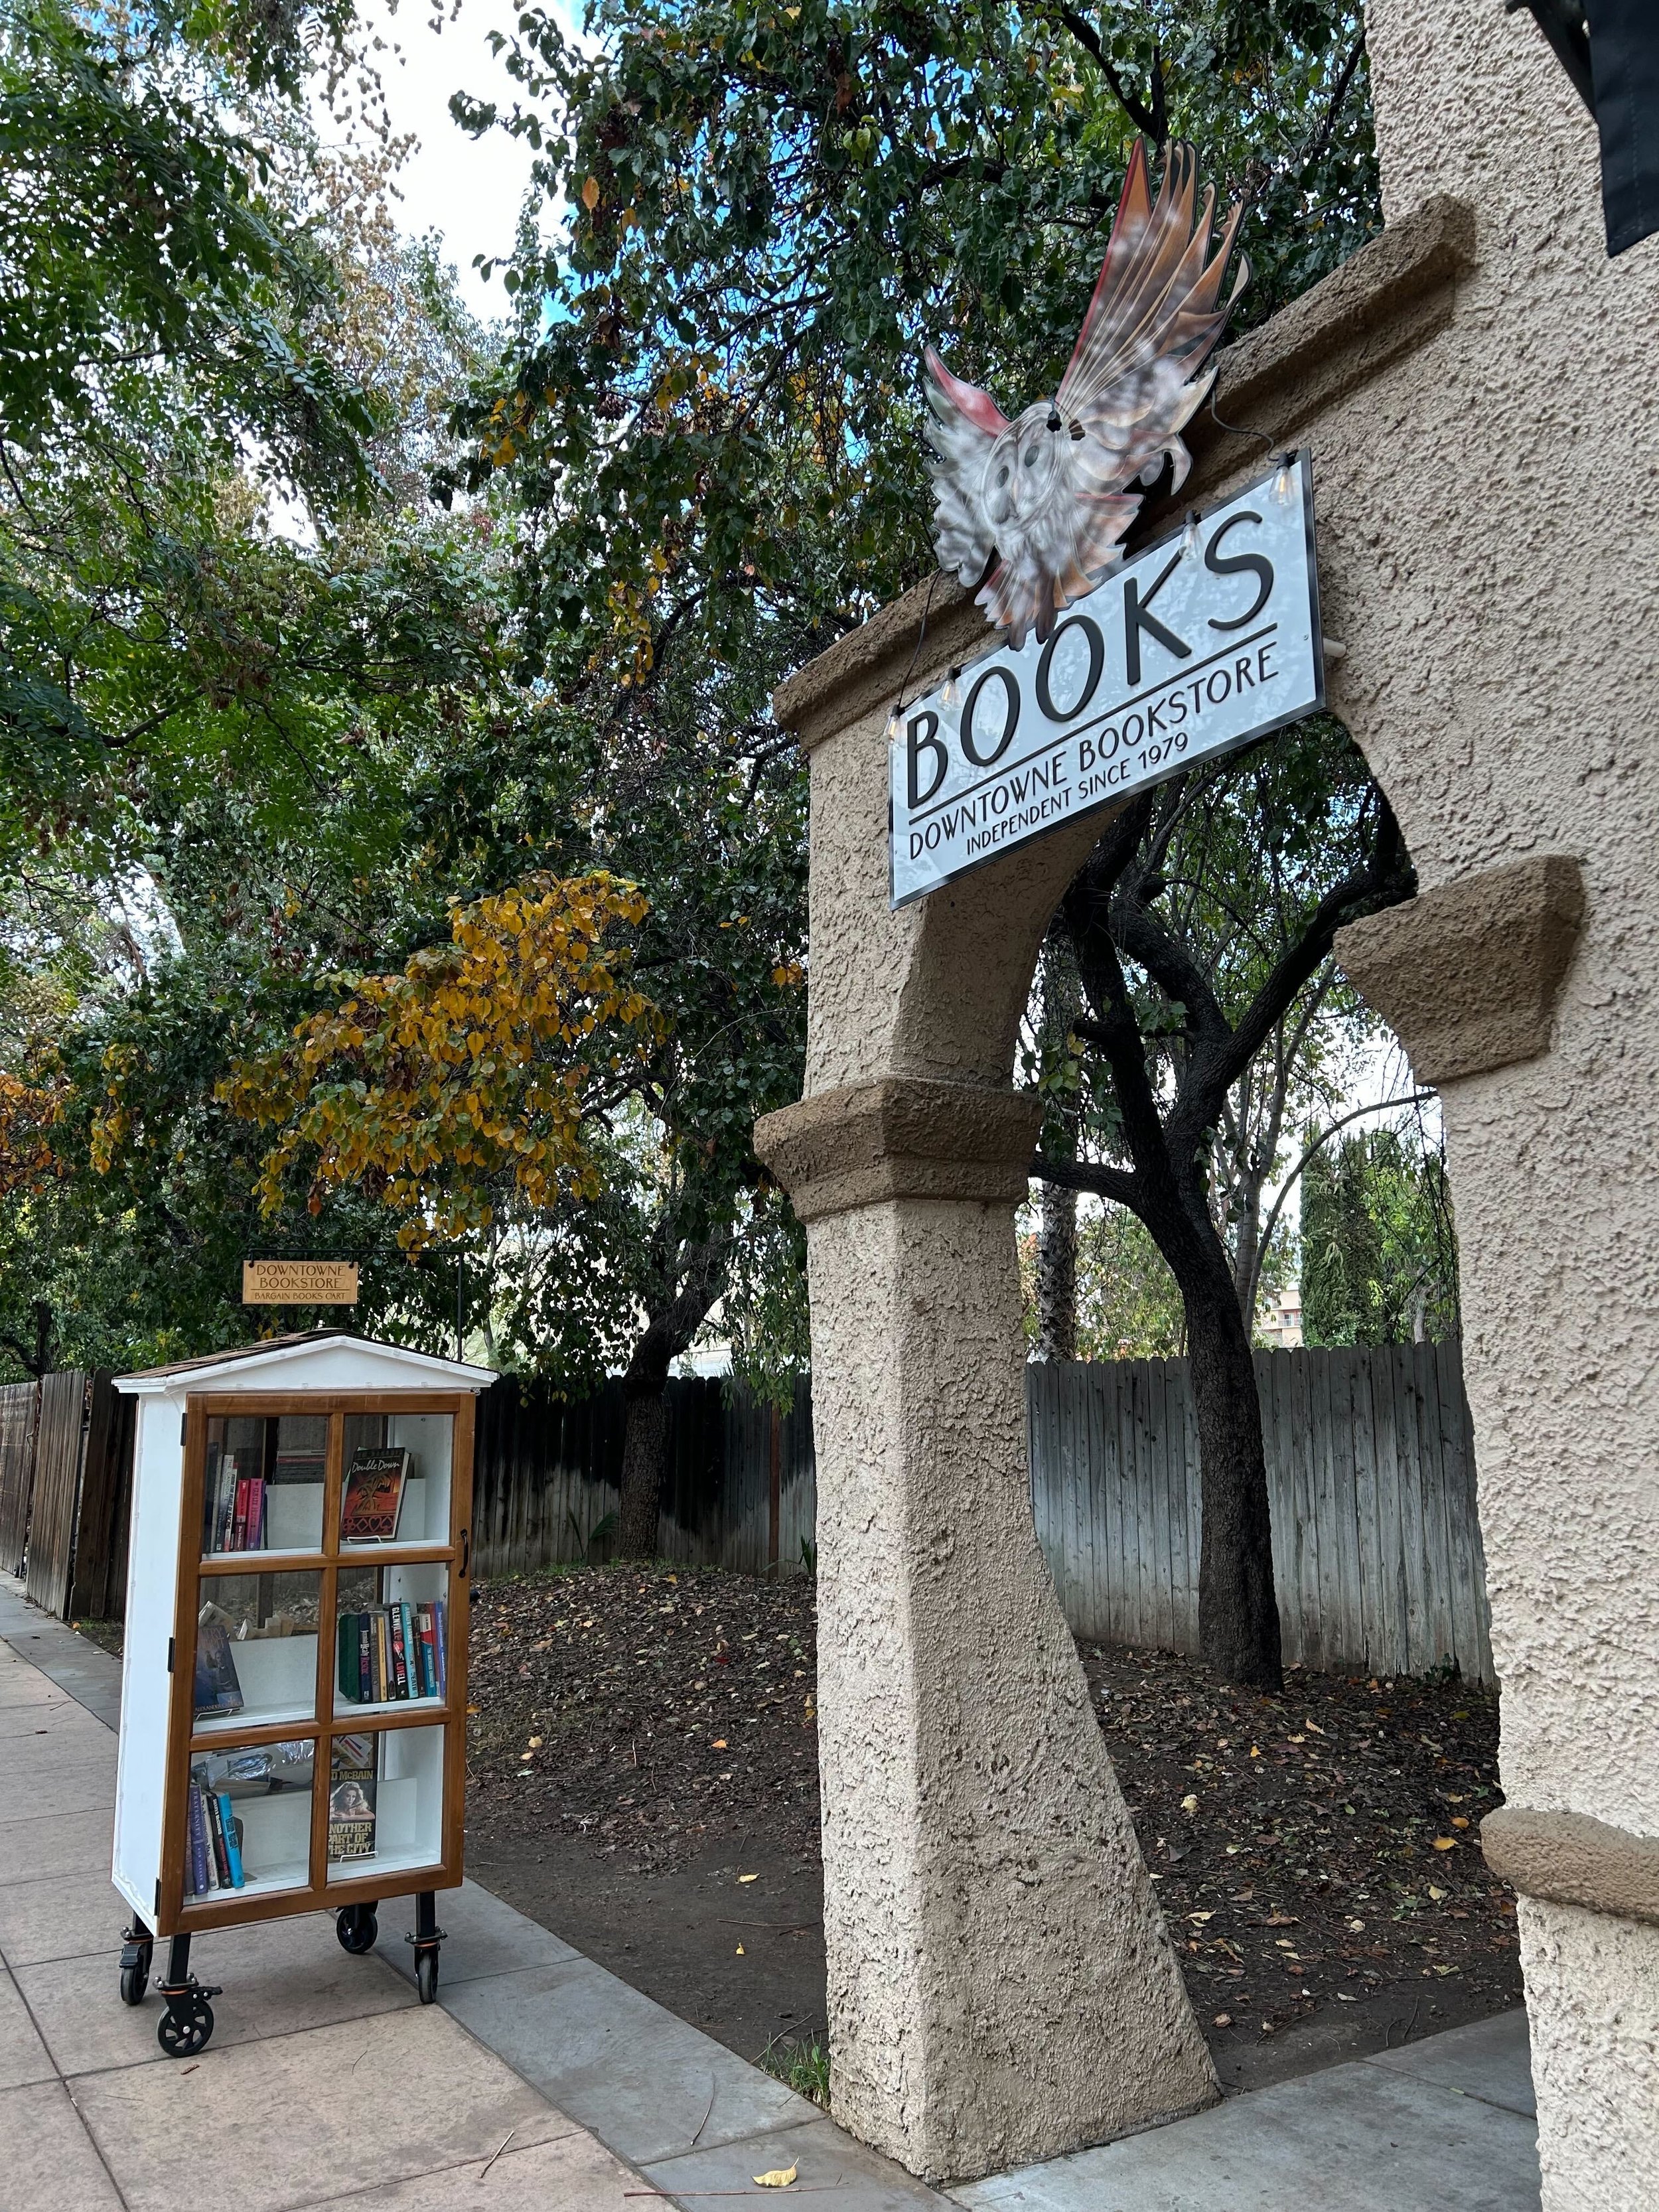 The front of Downetowne Bookstore in Riverside, CA